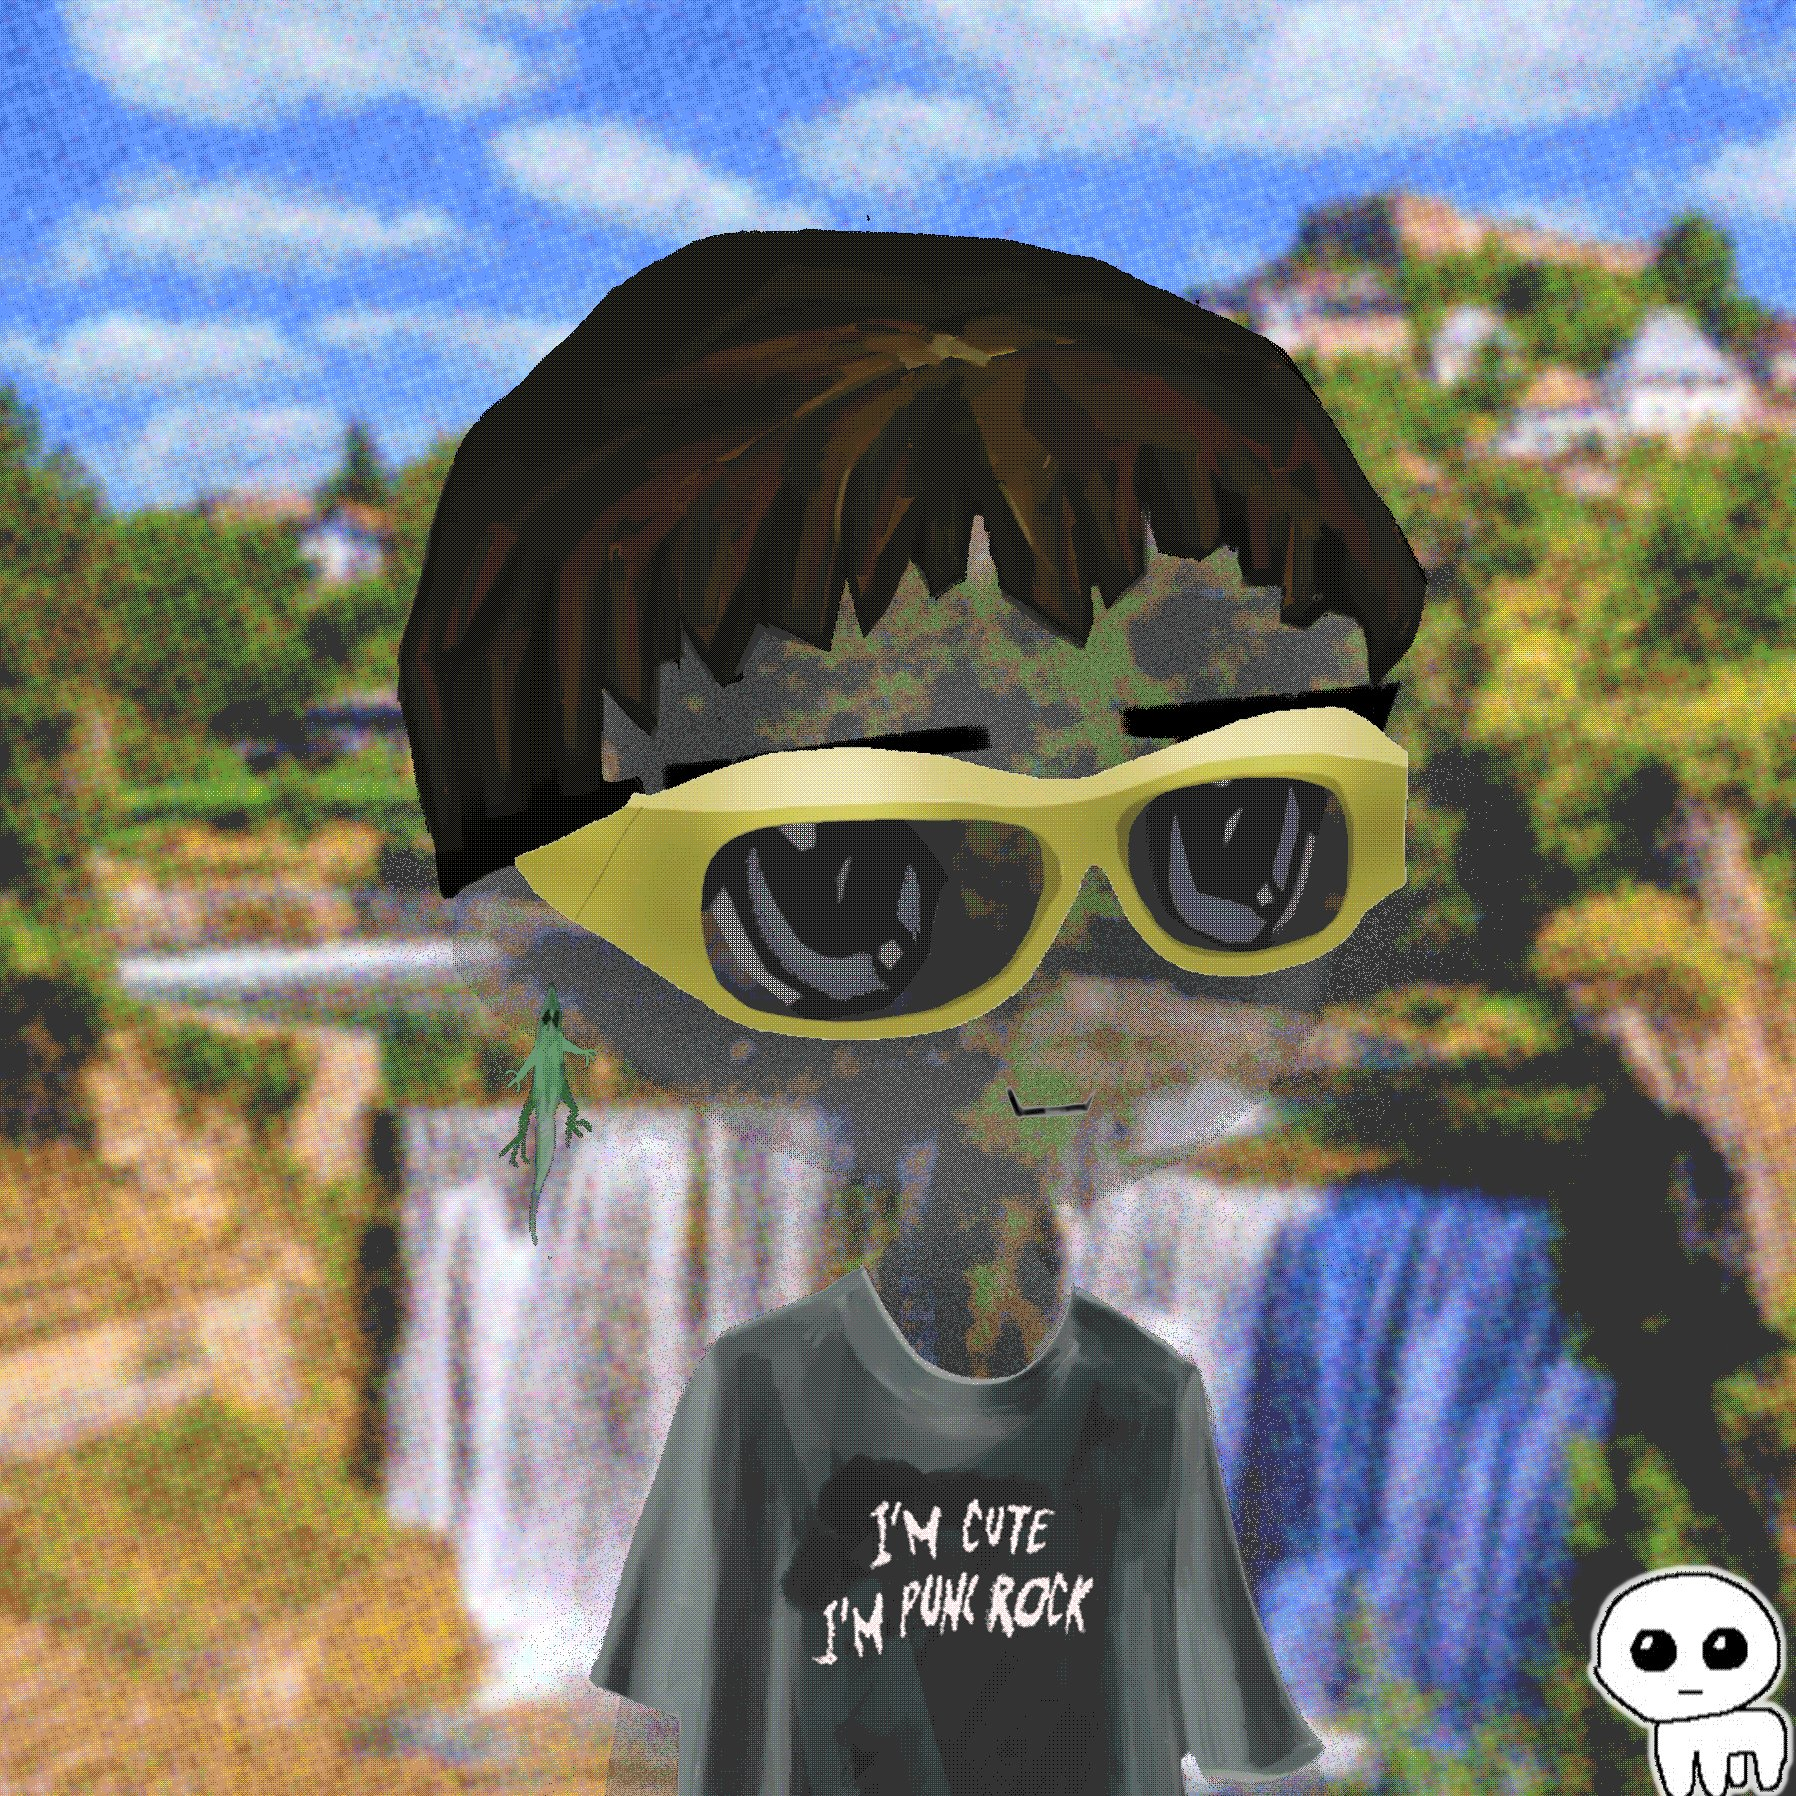 Ghost Remilio, with the "Missing Mottegas" glasses - a reference to a glitch in the original Milady Maker collection that had these glasses appear in the metadata but never show on the Milady due to a filename typo; as well as the "I'm Cute / I'm Punk Rock" shirt, also from Milady (which itself is a reference to a shirt worn by hyperpop rapper, Caspr (now a Milady); edited from: "I'm Not Cute / I'm Punk Rock")